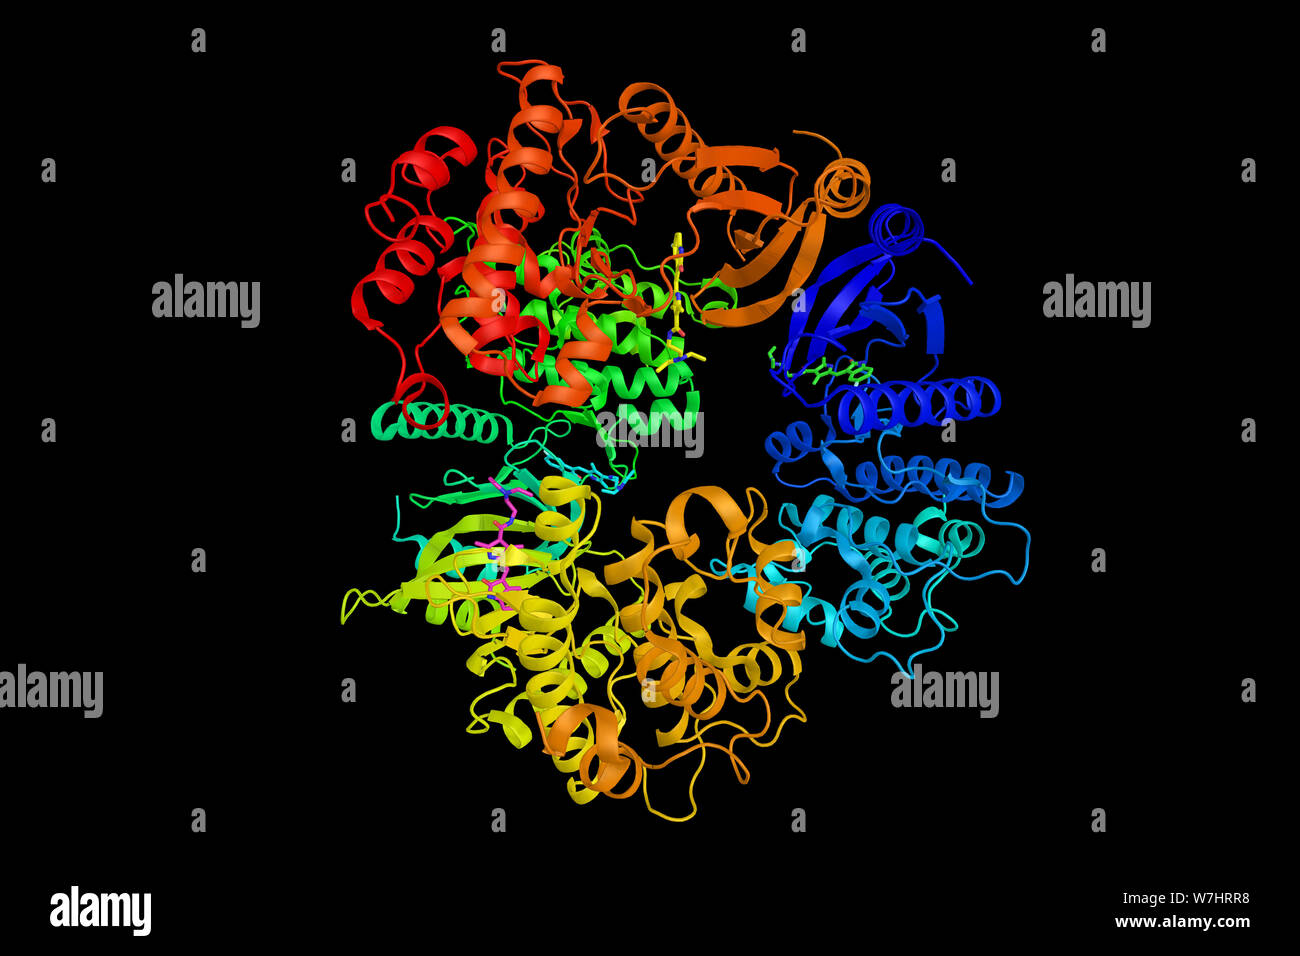 Phosphorylase b kinase gamma catalytic chain, testis/liver isoform, an enzyme that in humans is encoded by the PHKG2 gene. 3d rendering. Stock Photo